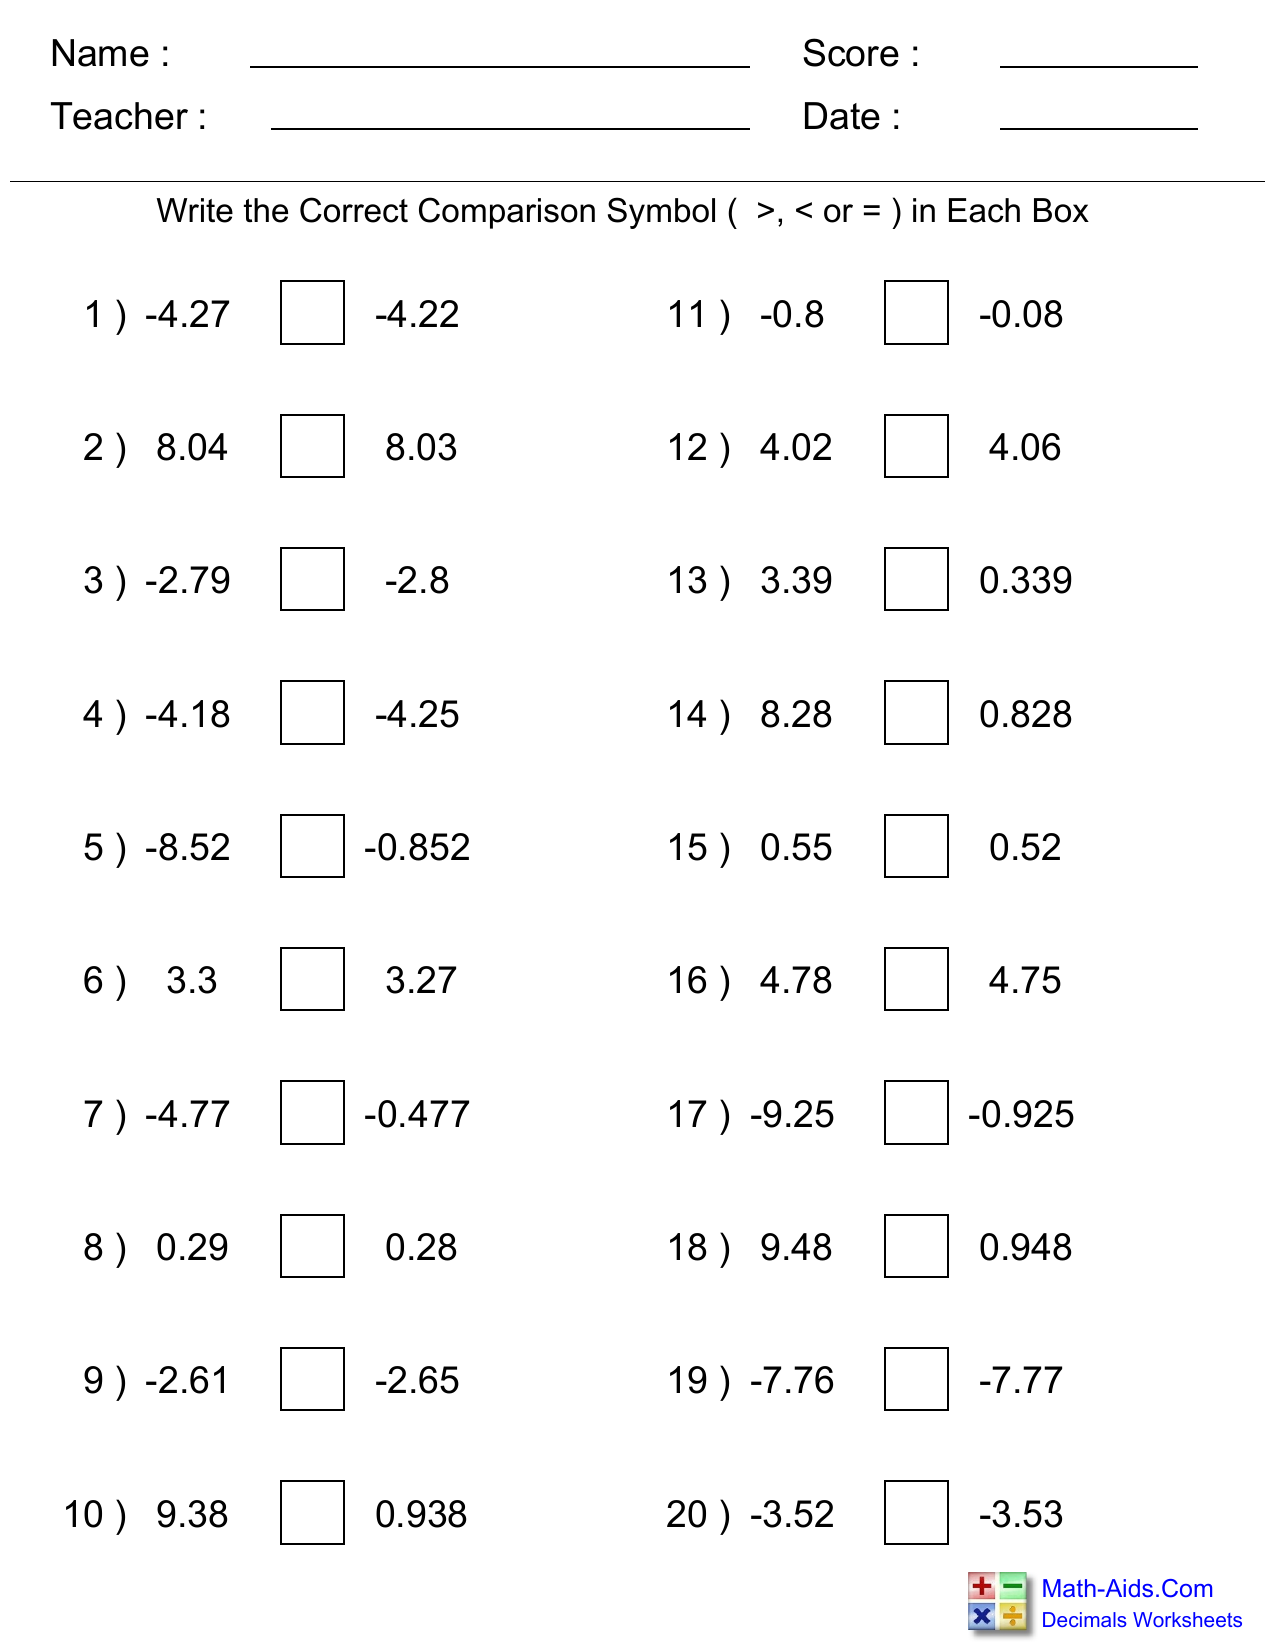 my homework lesson 7 compare decimals page 53 answer key